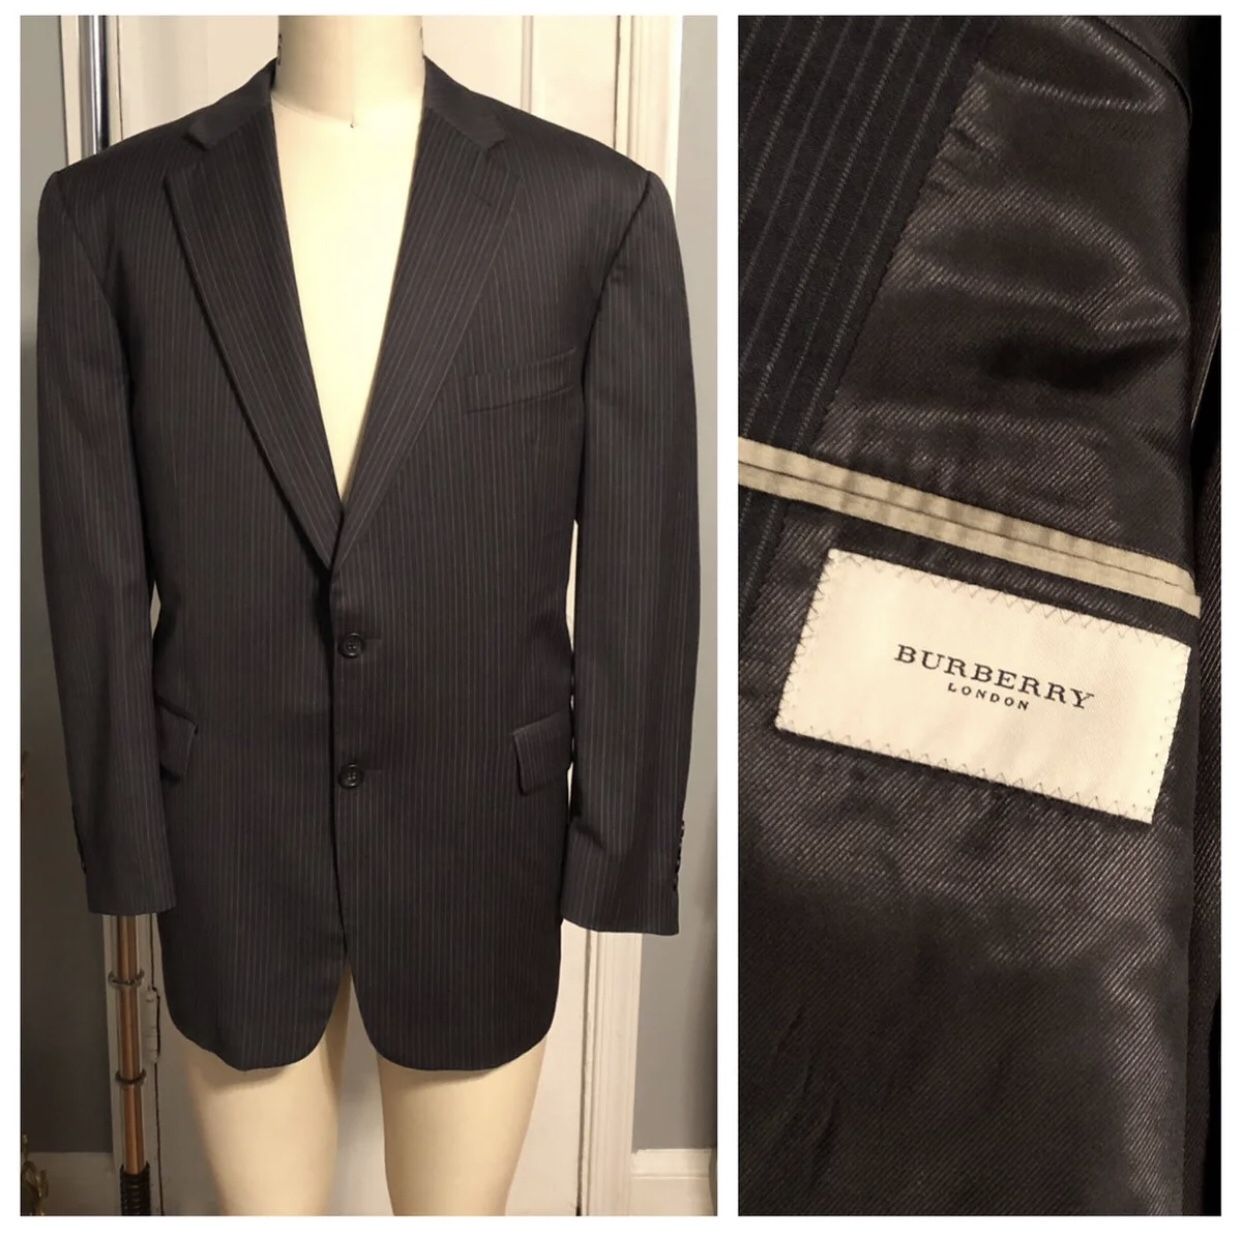 Burberry Kingston blazer paid $800 size 44R modern Tailored fit with pin stripes excellent condition authentic!